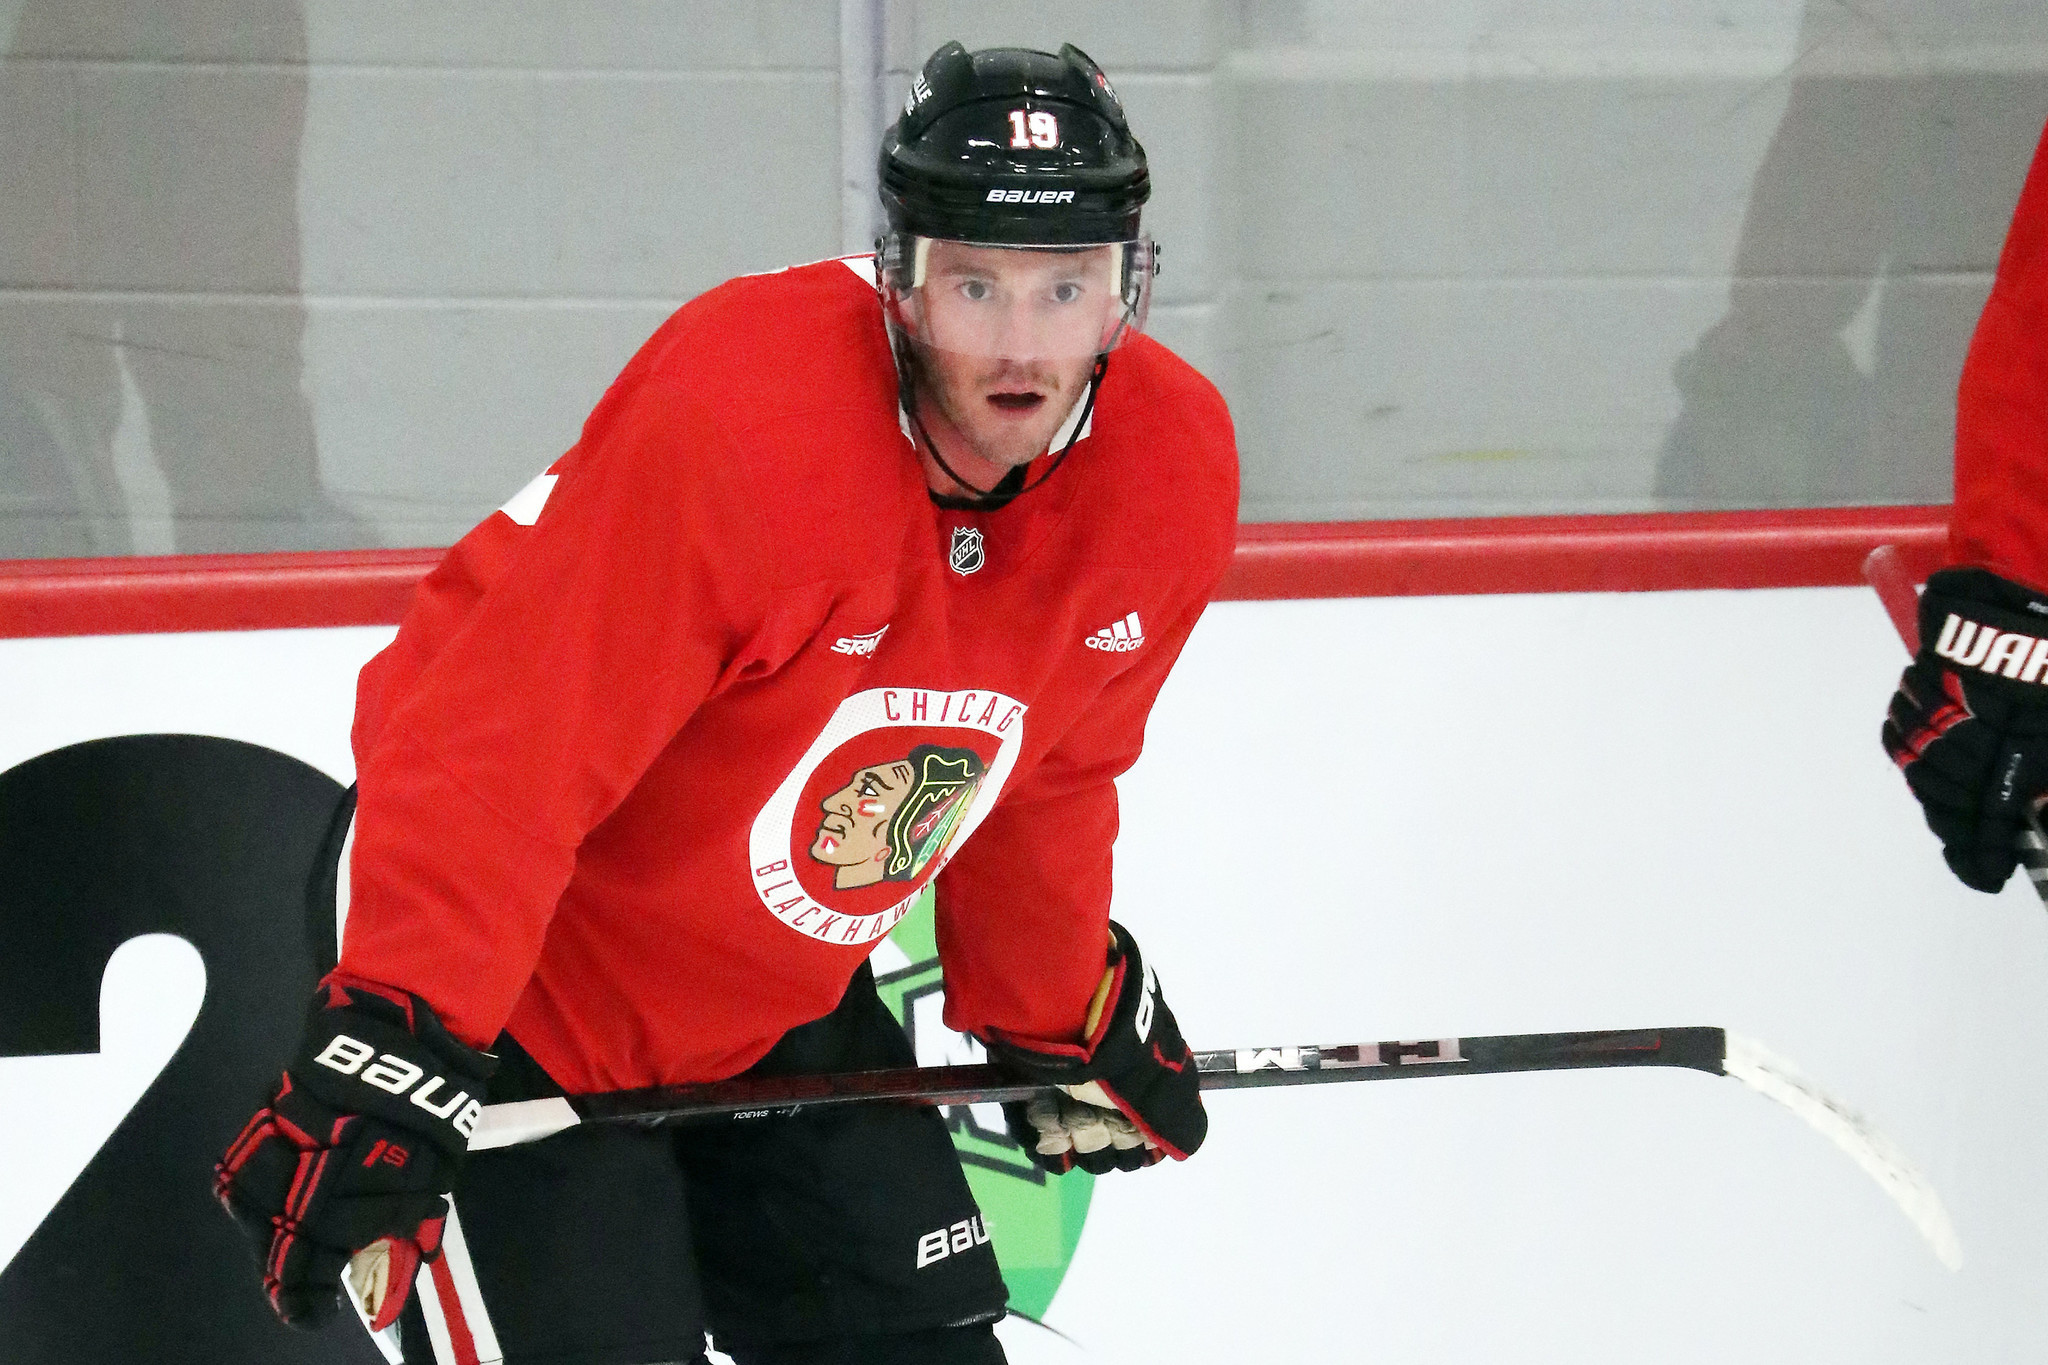 Beating the odds is Blackhawks forward Andrew Shaw's game